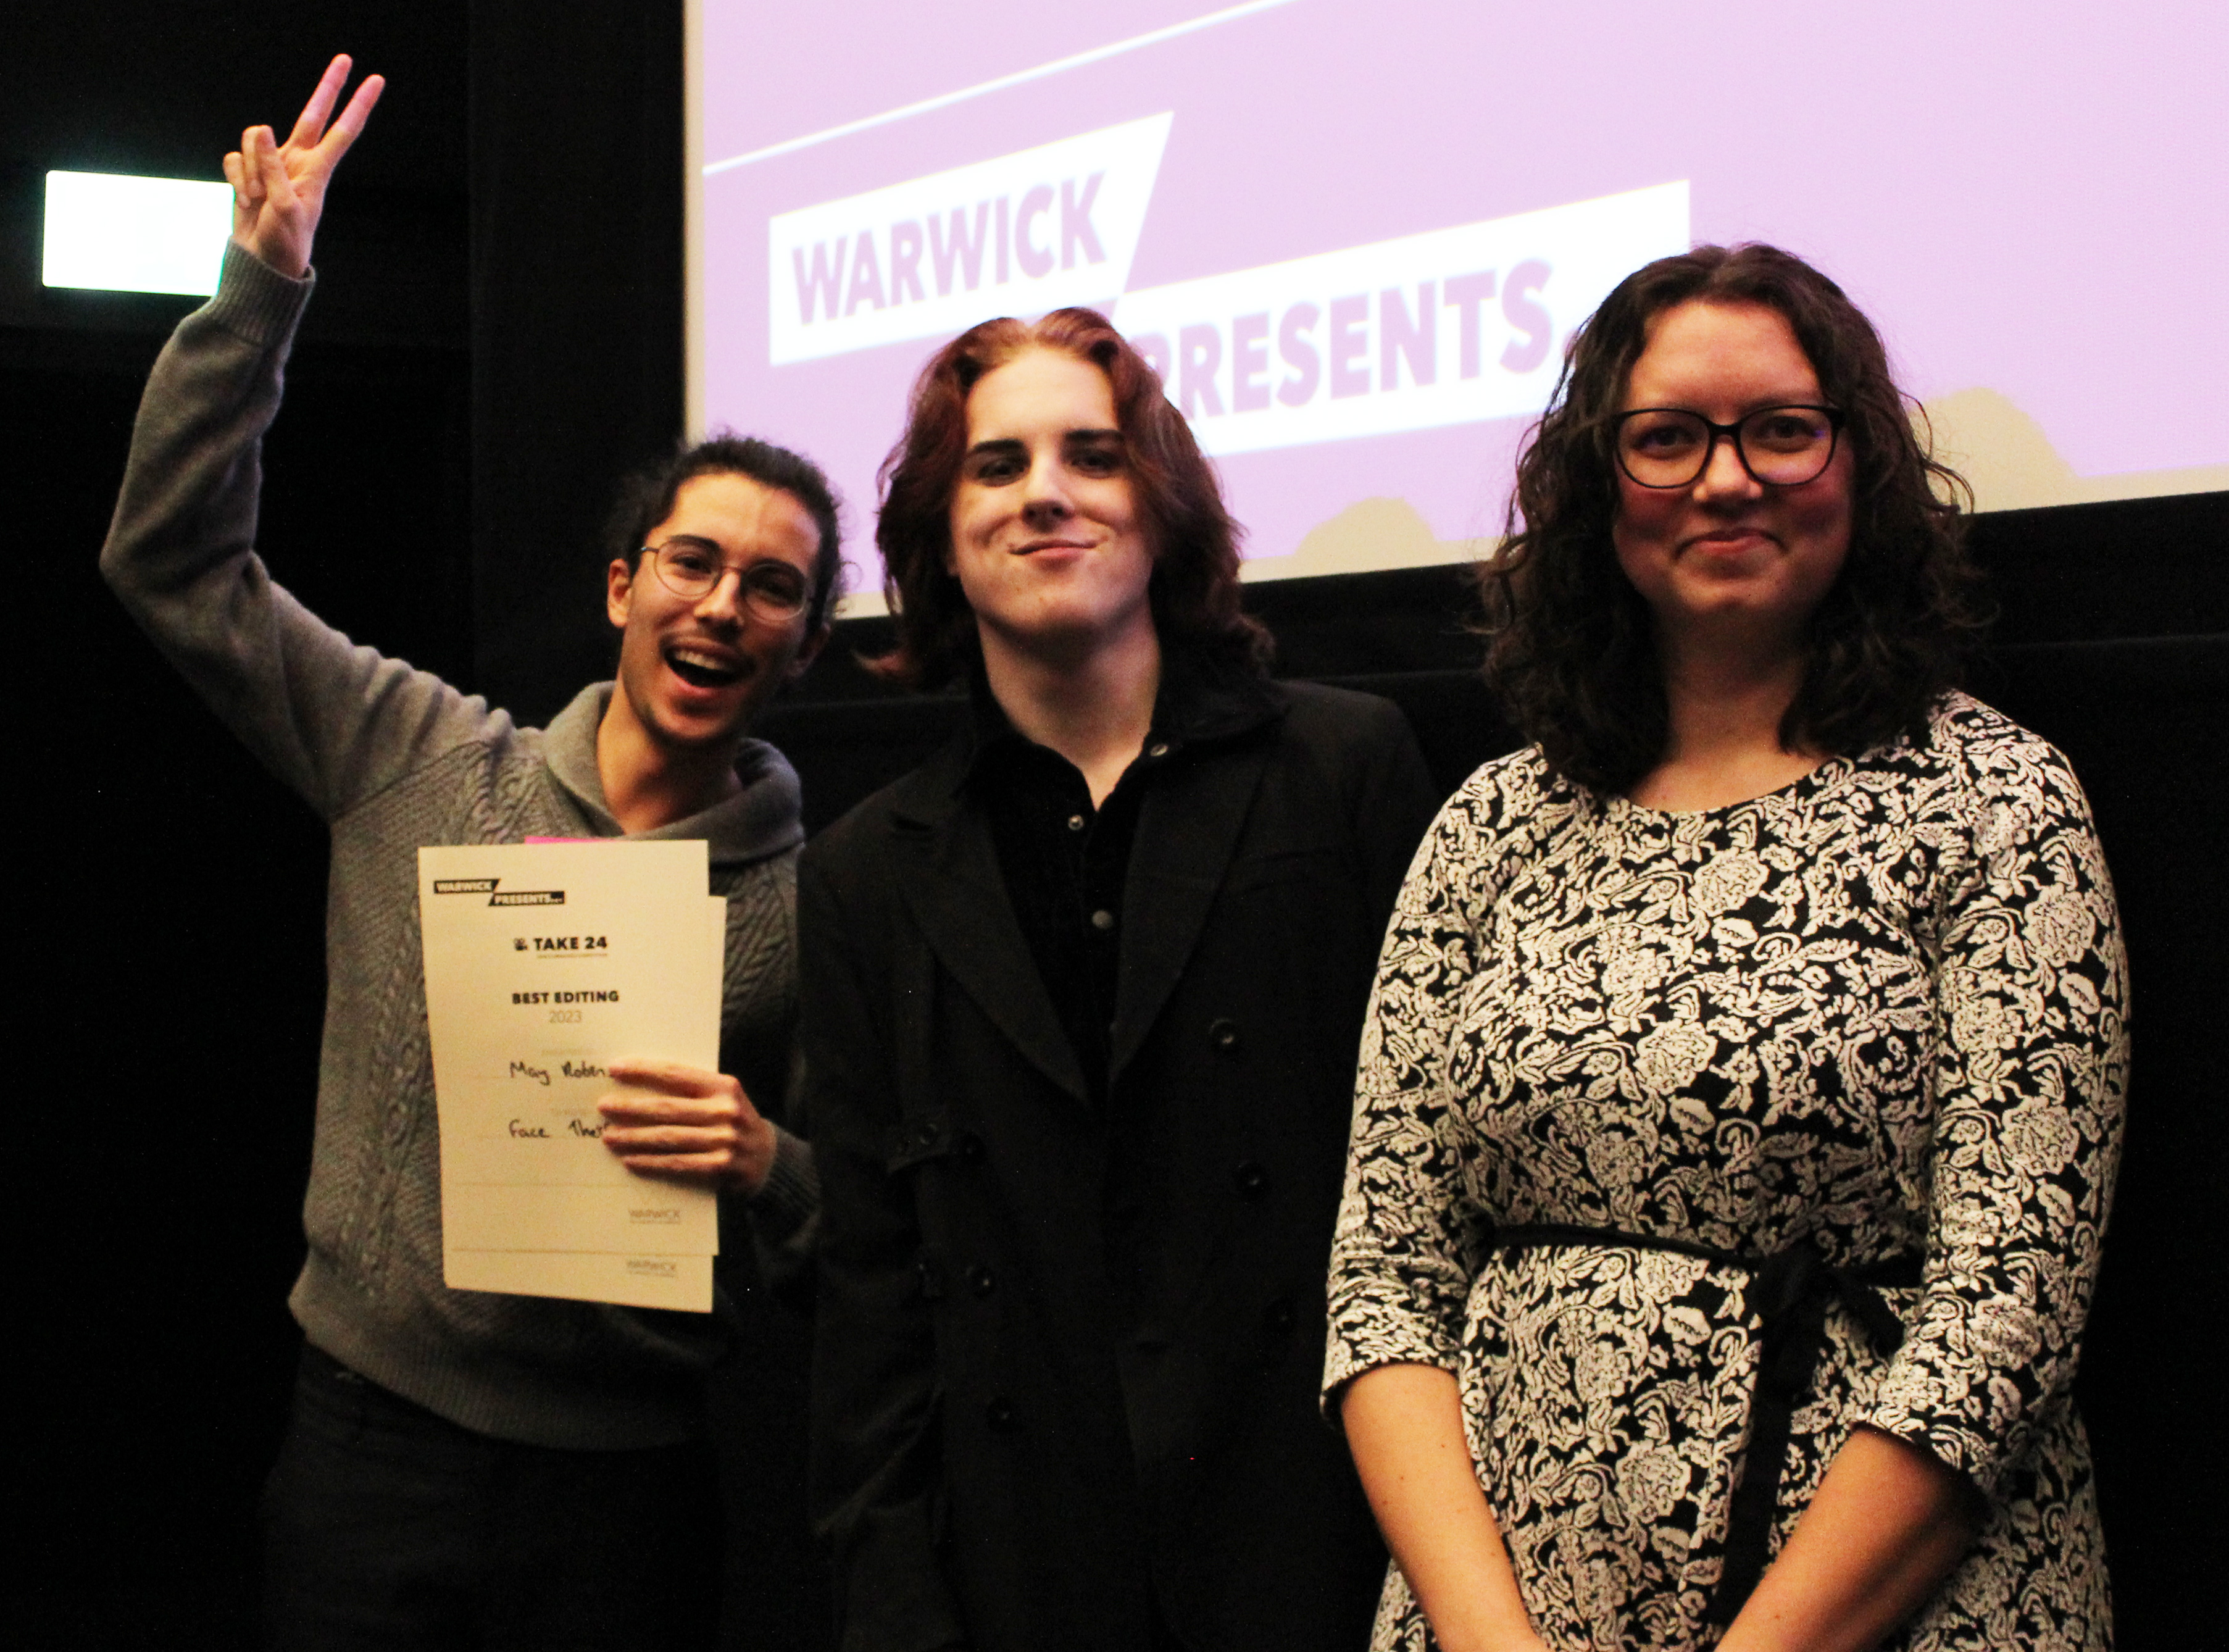 The team smile at the camera with their certificate, one holds up two fingers to mark their second award of the night.